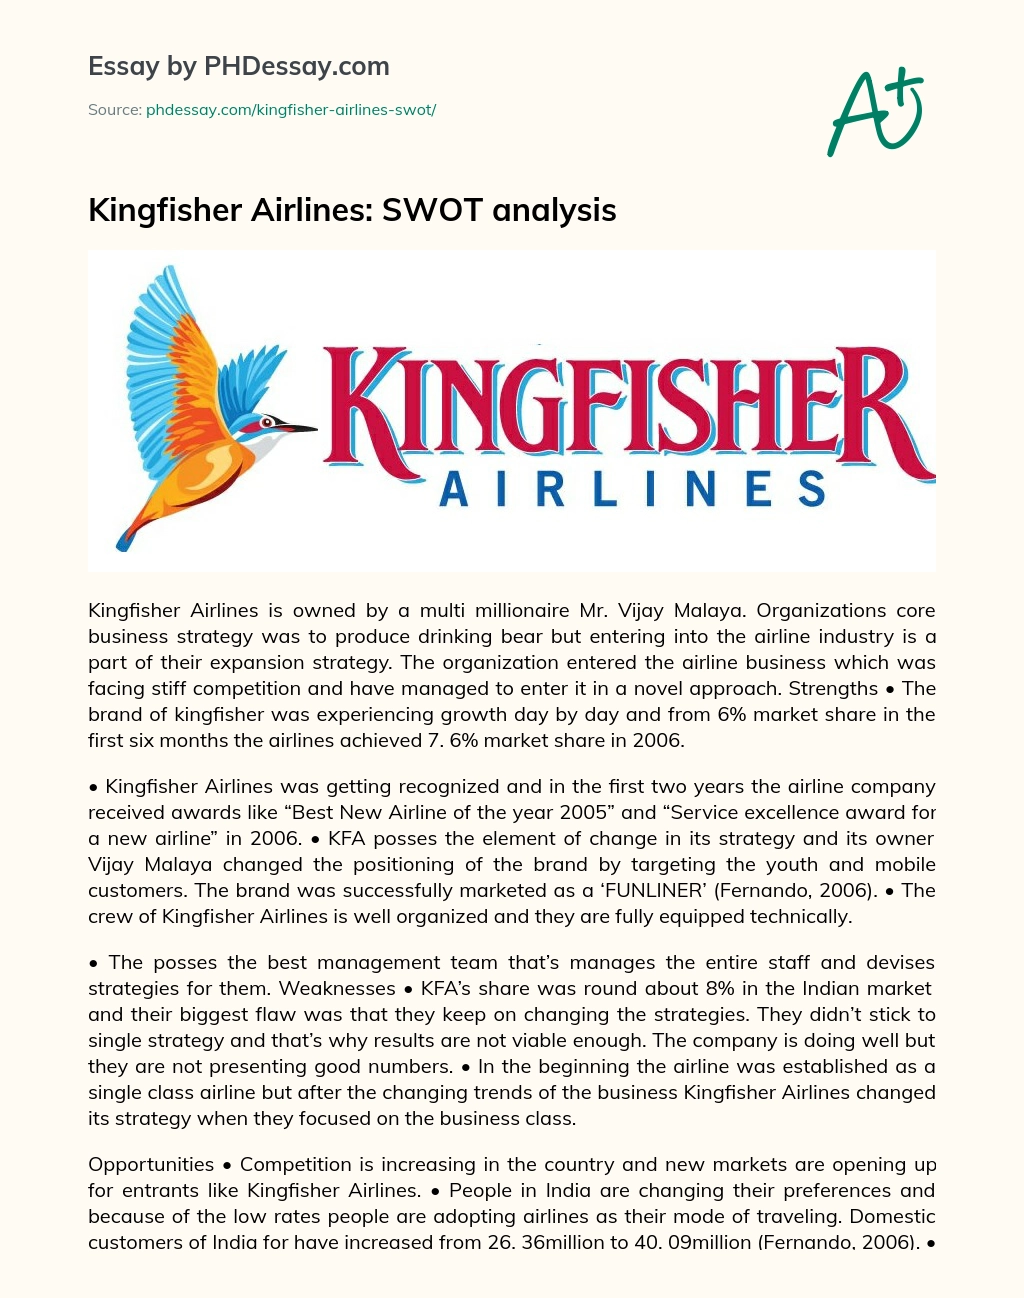 Kingfisher Airlines: SWOT Analysis essay